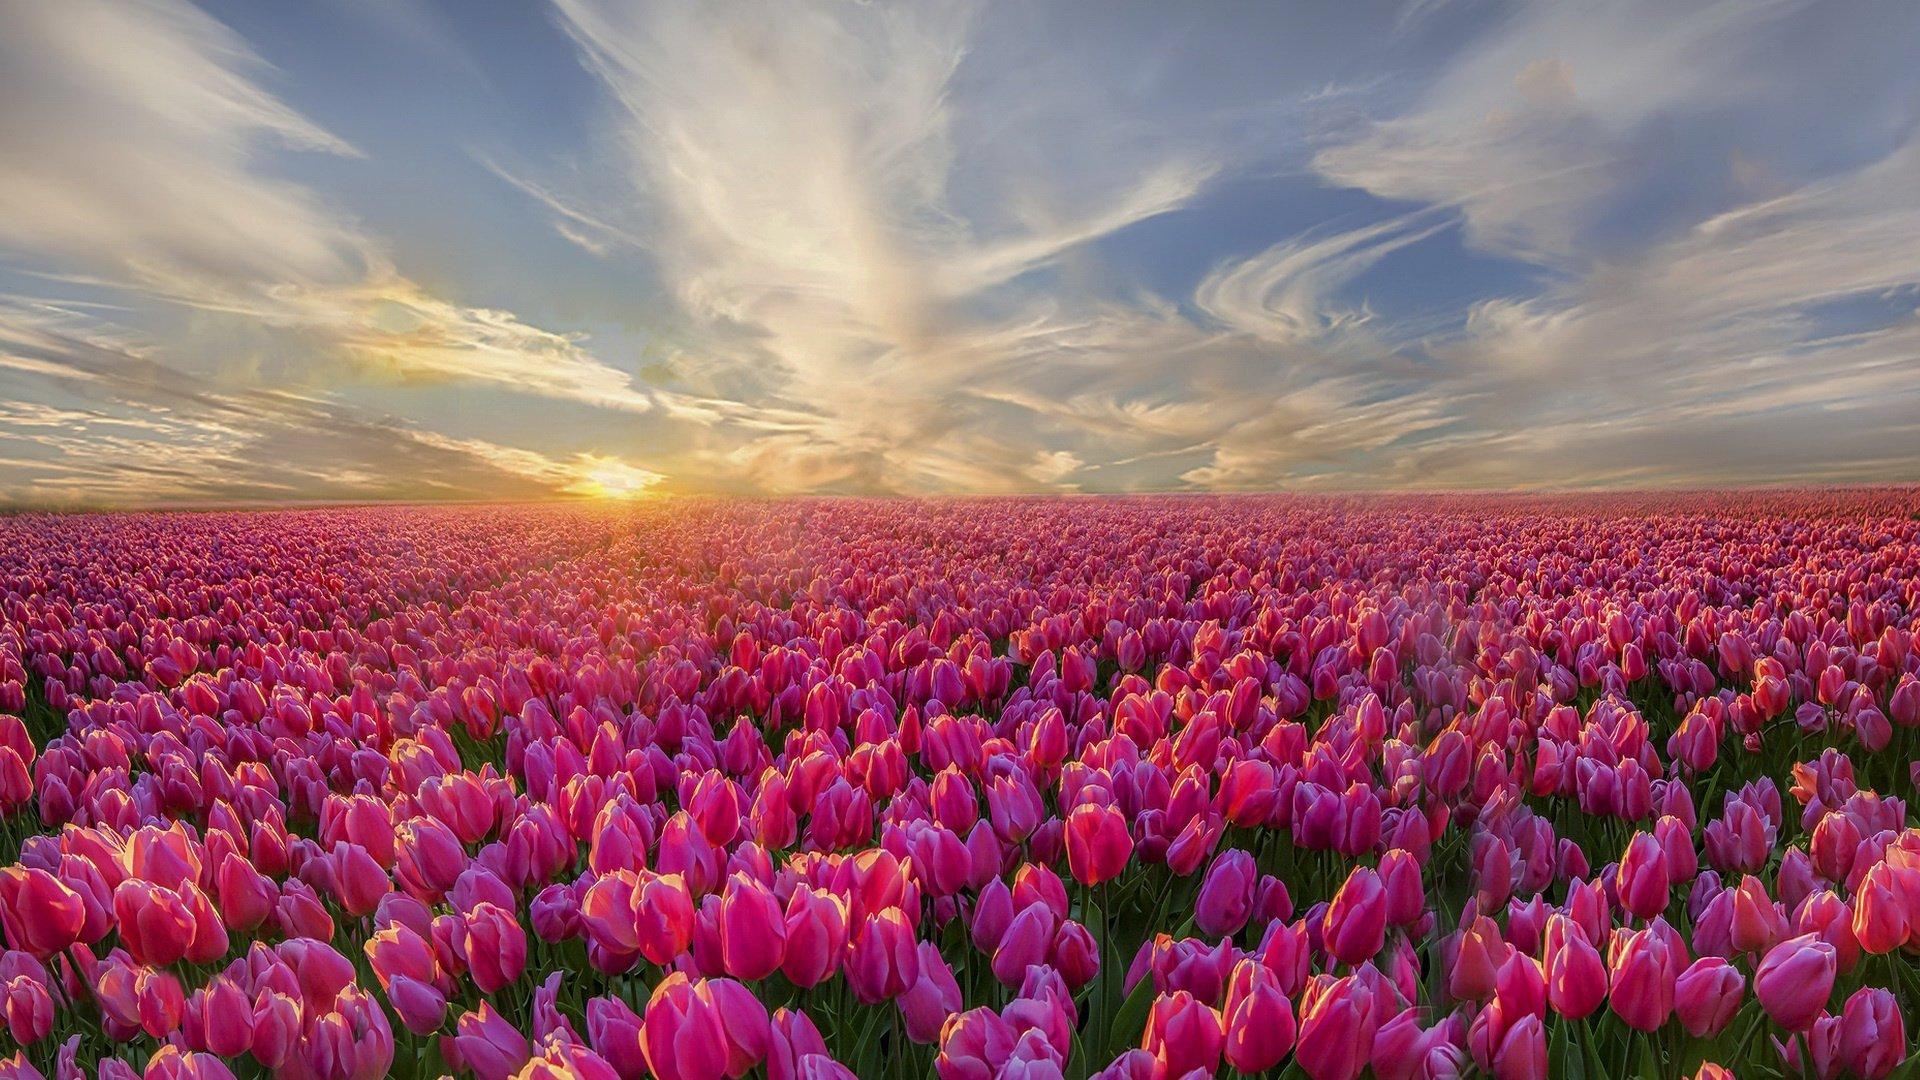 1920X1080 Tulips Wallpapers - Top Free 1920X1080 Tulips Backgrounds ...